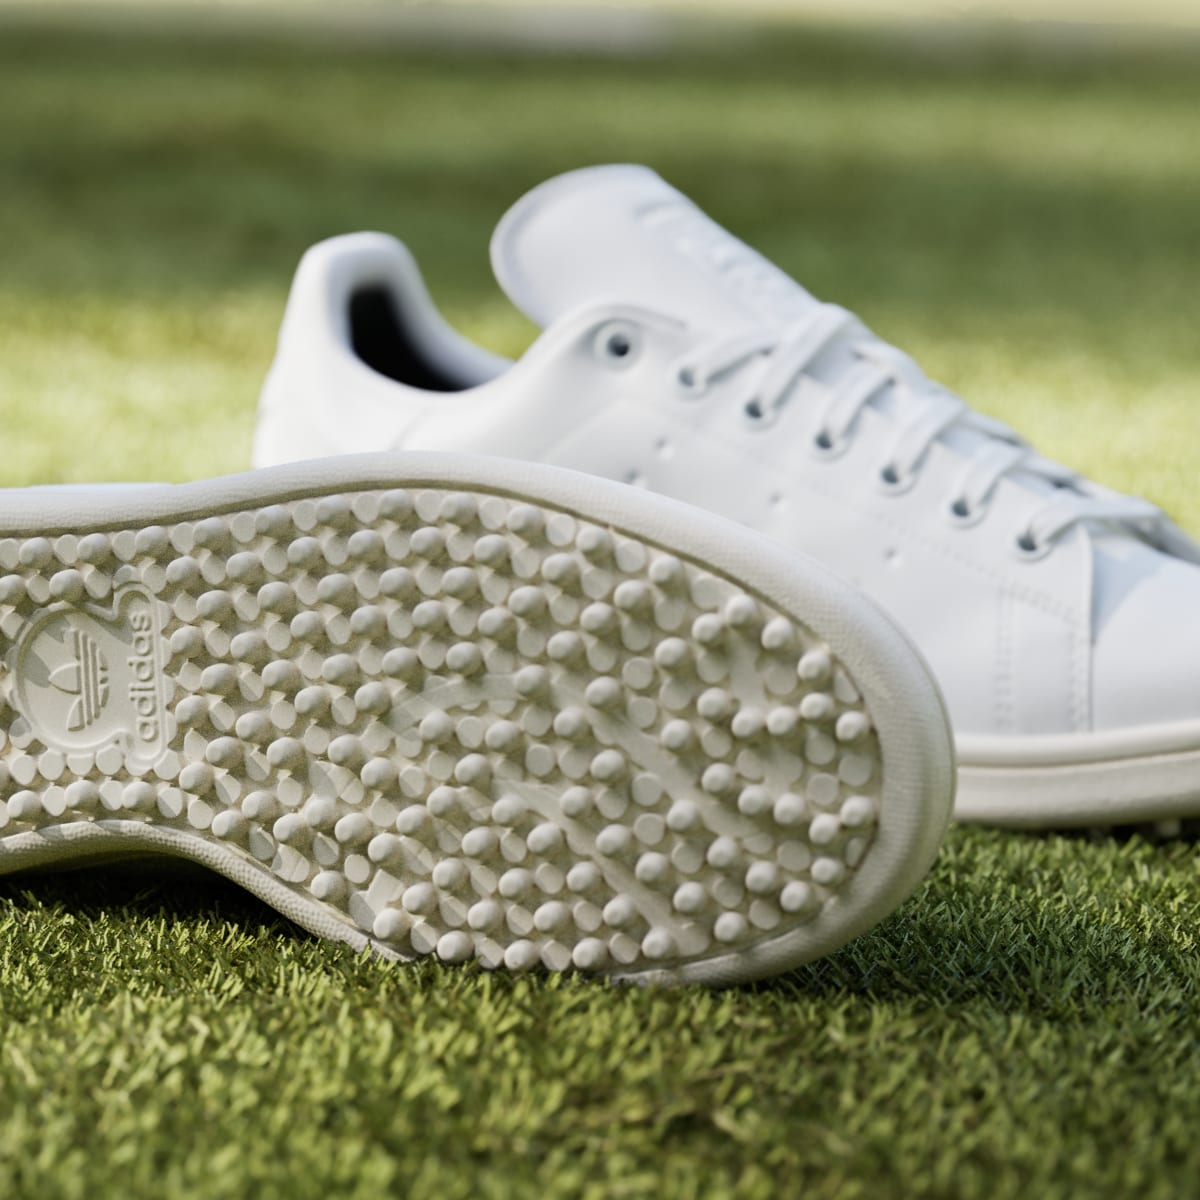 Adidas Stan Smith Golf Shoes. 8